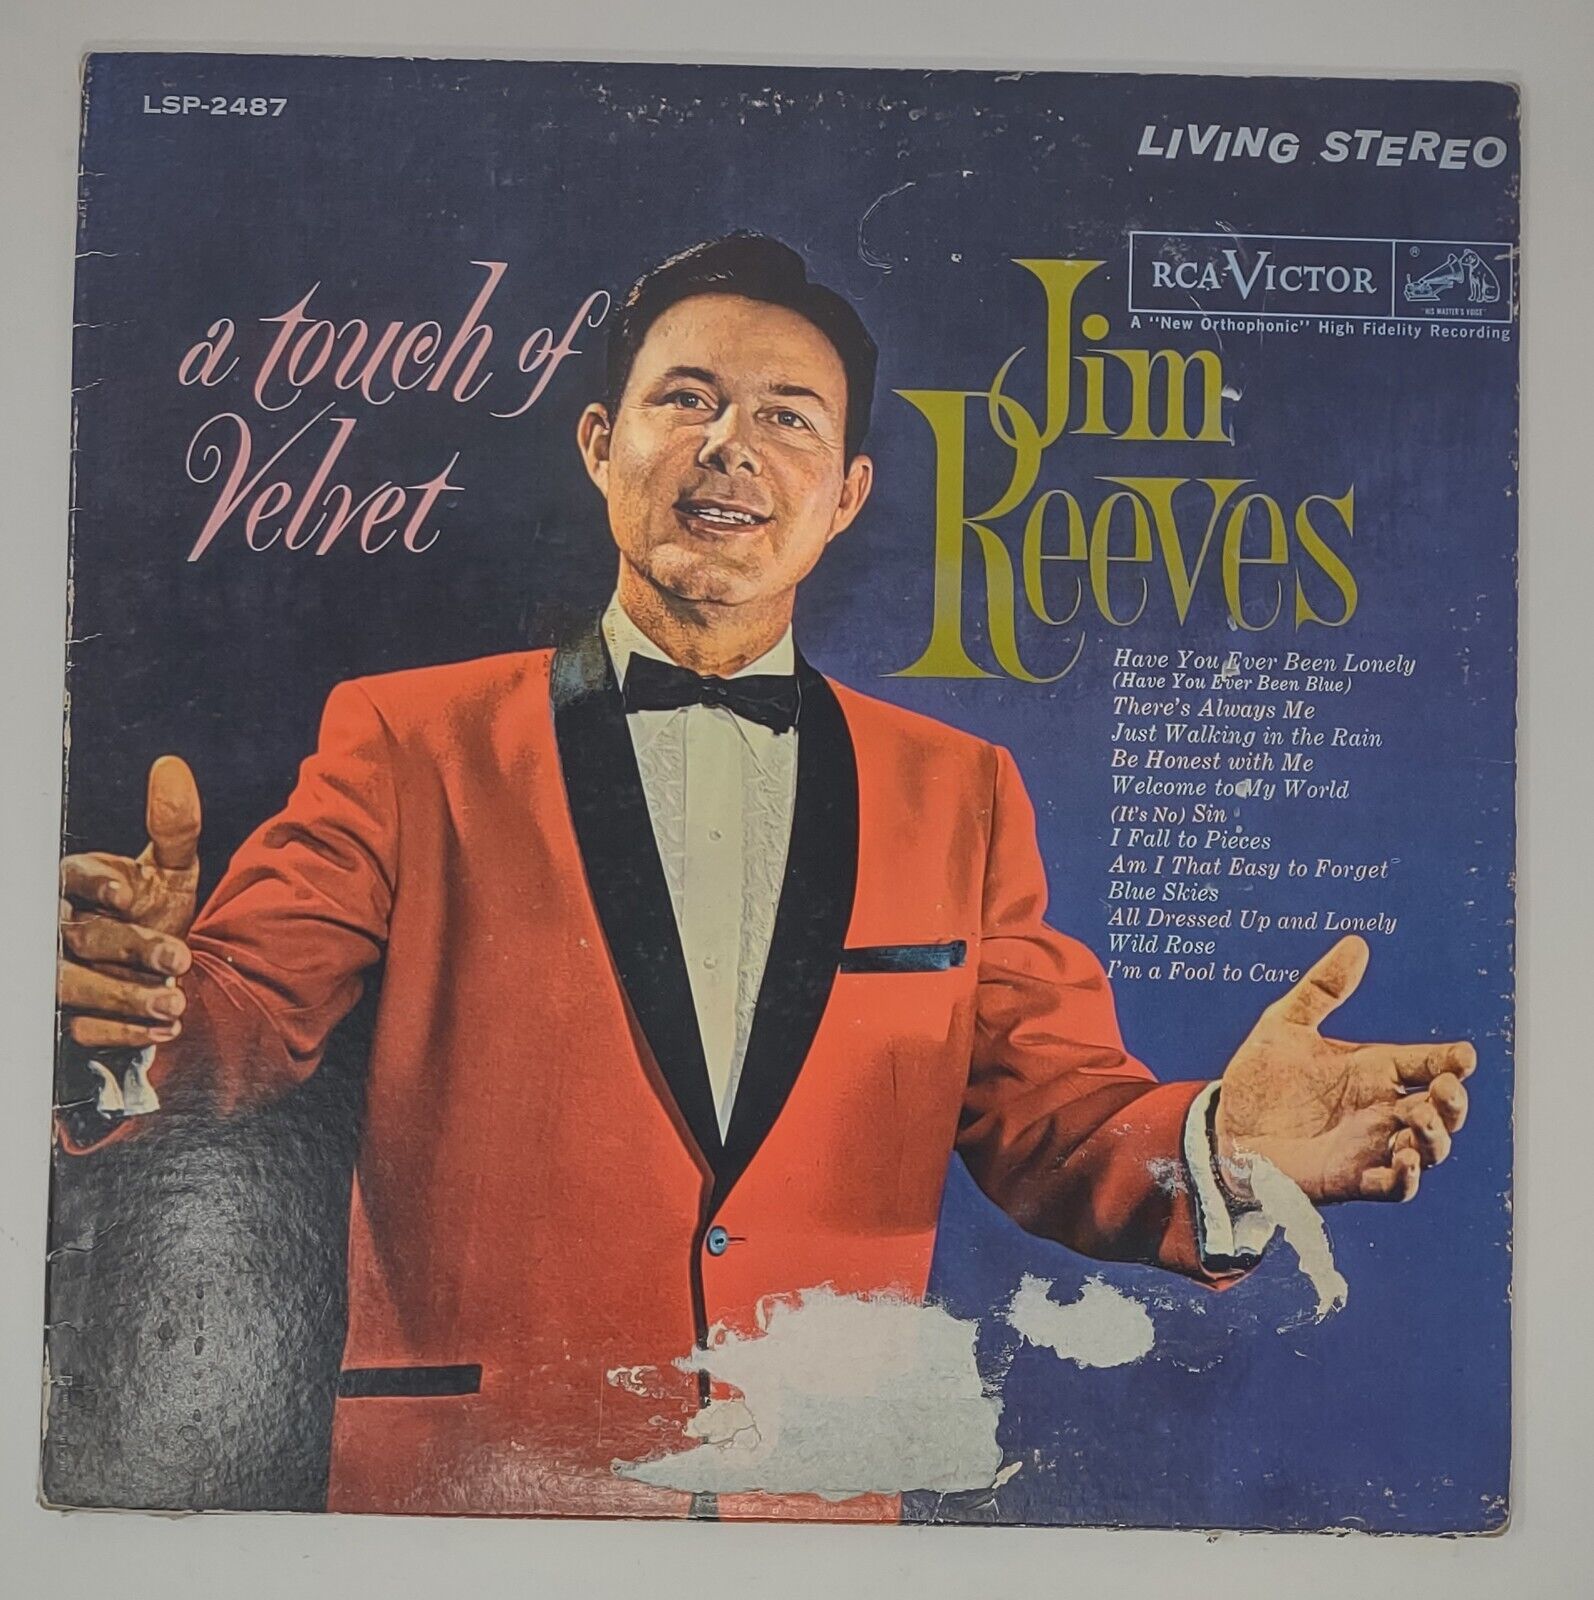 Jim Reeves A touch of Velvet LPM/LSP-2487 Pop, Country 12 Songs RCA Victor Label